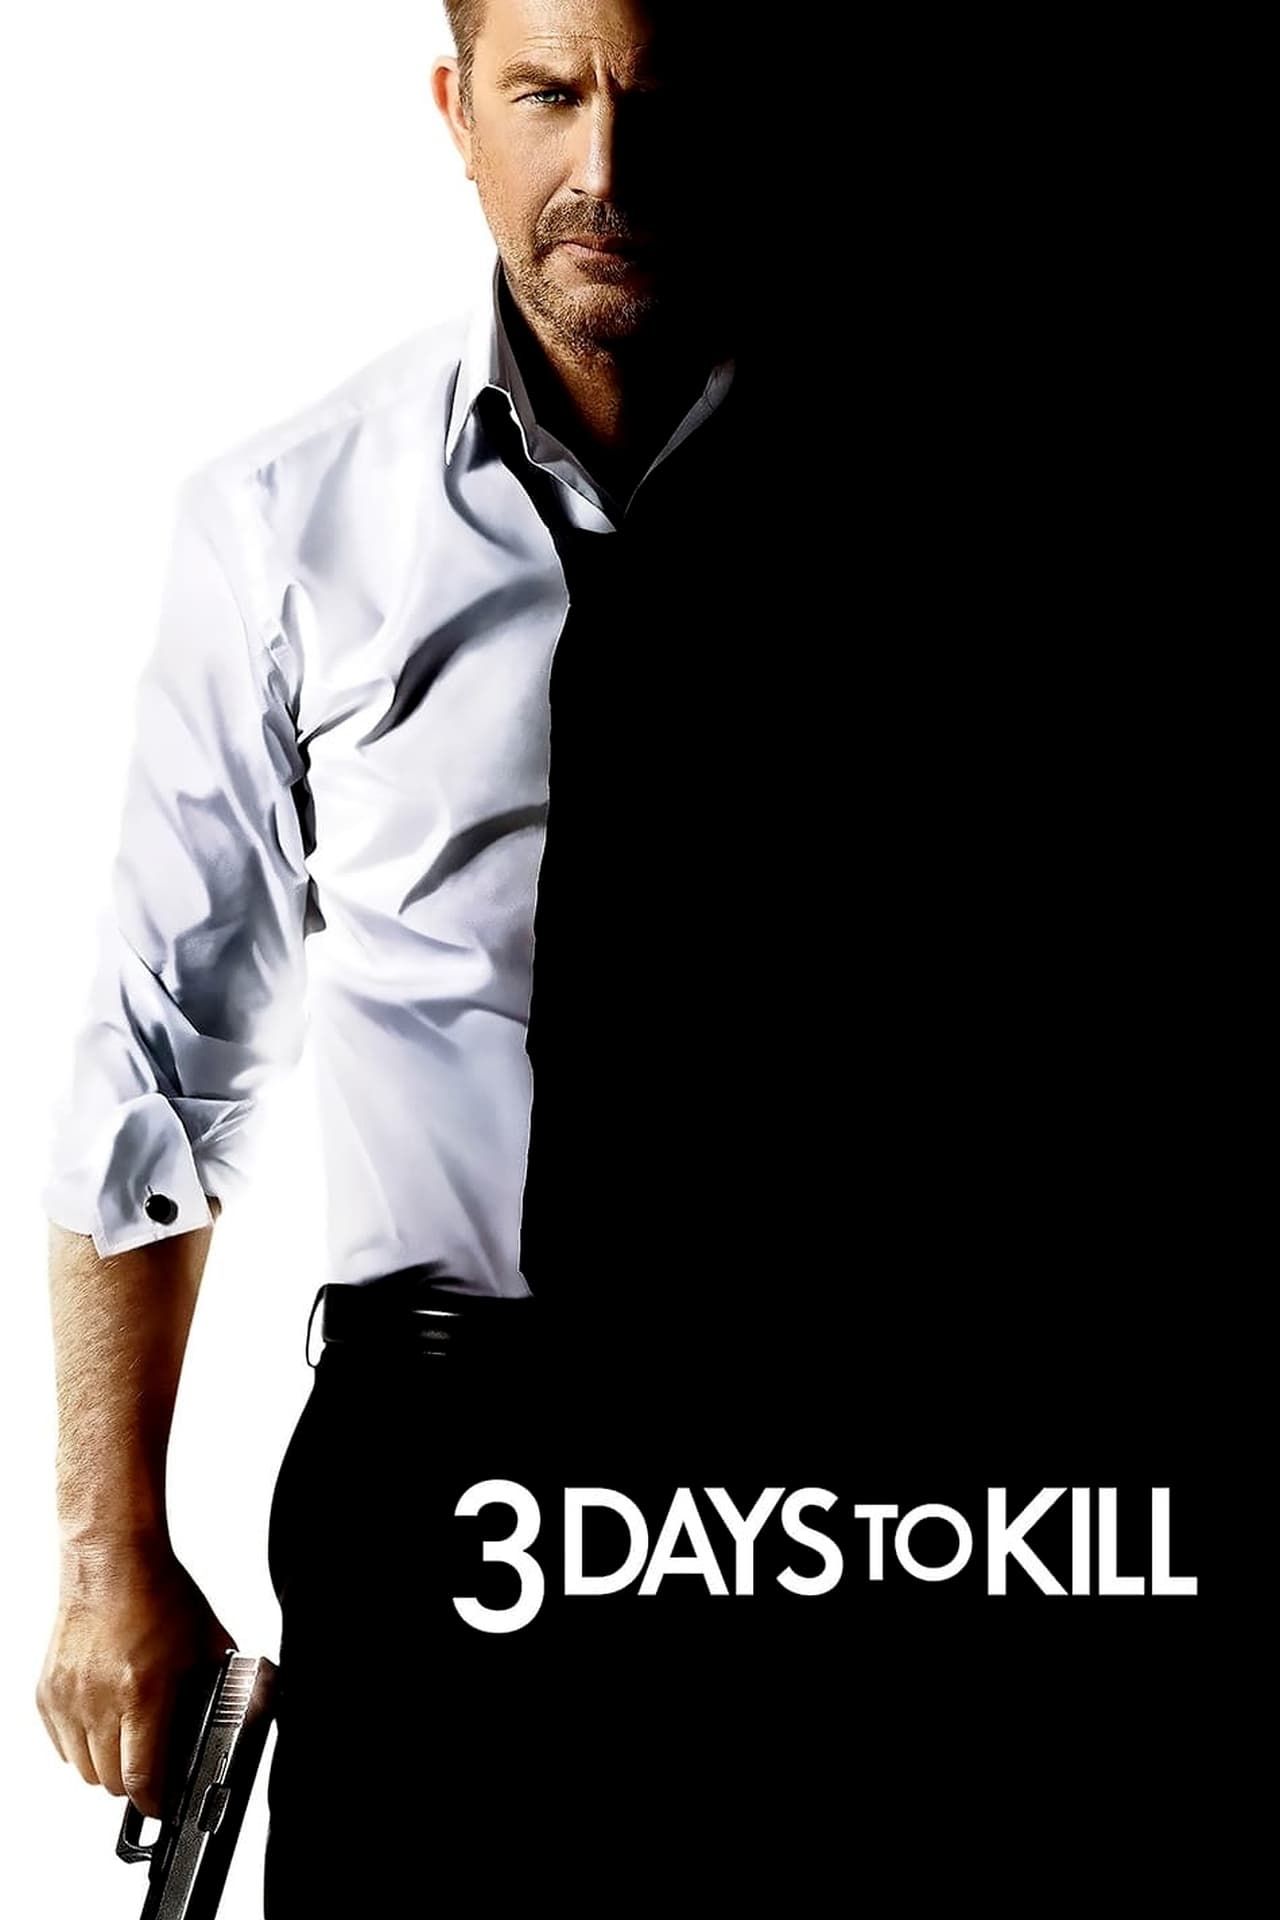 3 Days to Kill Movie Poster Showing Kevin Costner Holding a Gun